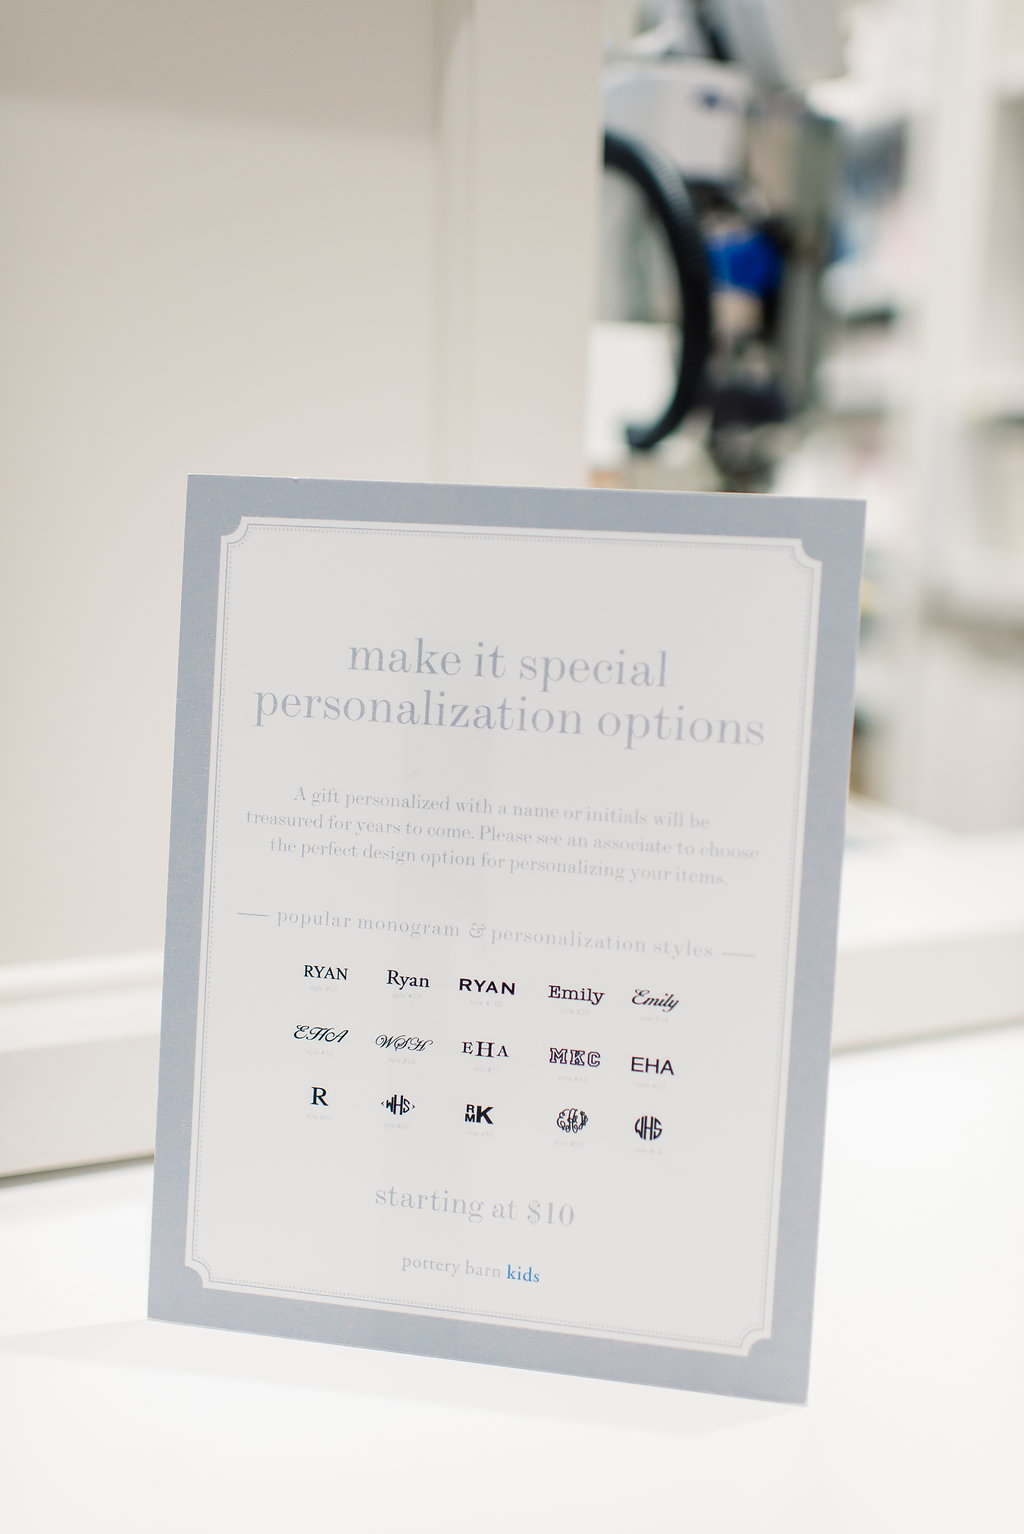 Personalization Options from Pottery Barn Kids